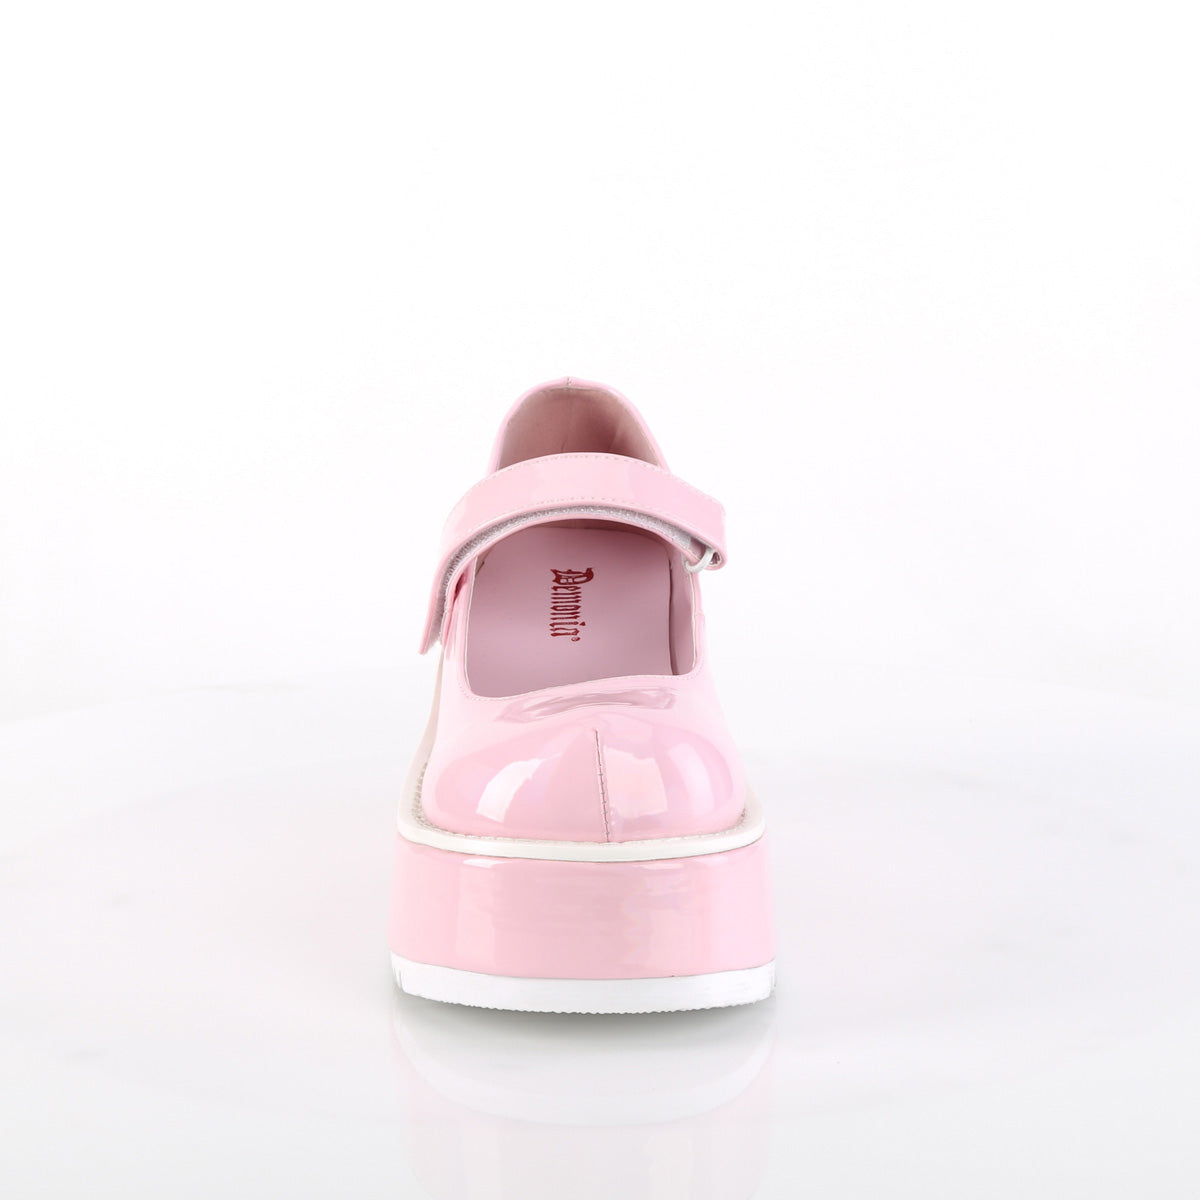 DOLLIE-01 Baby Pink Hologram Patent